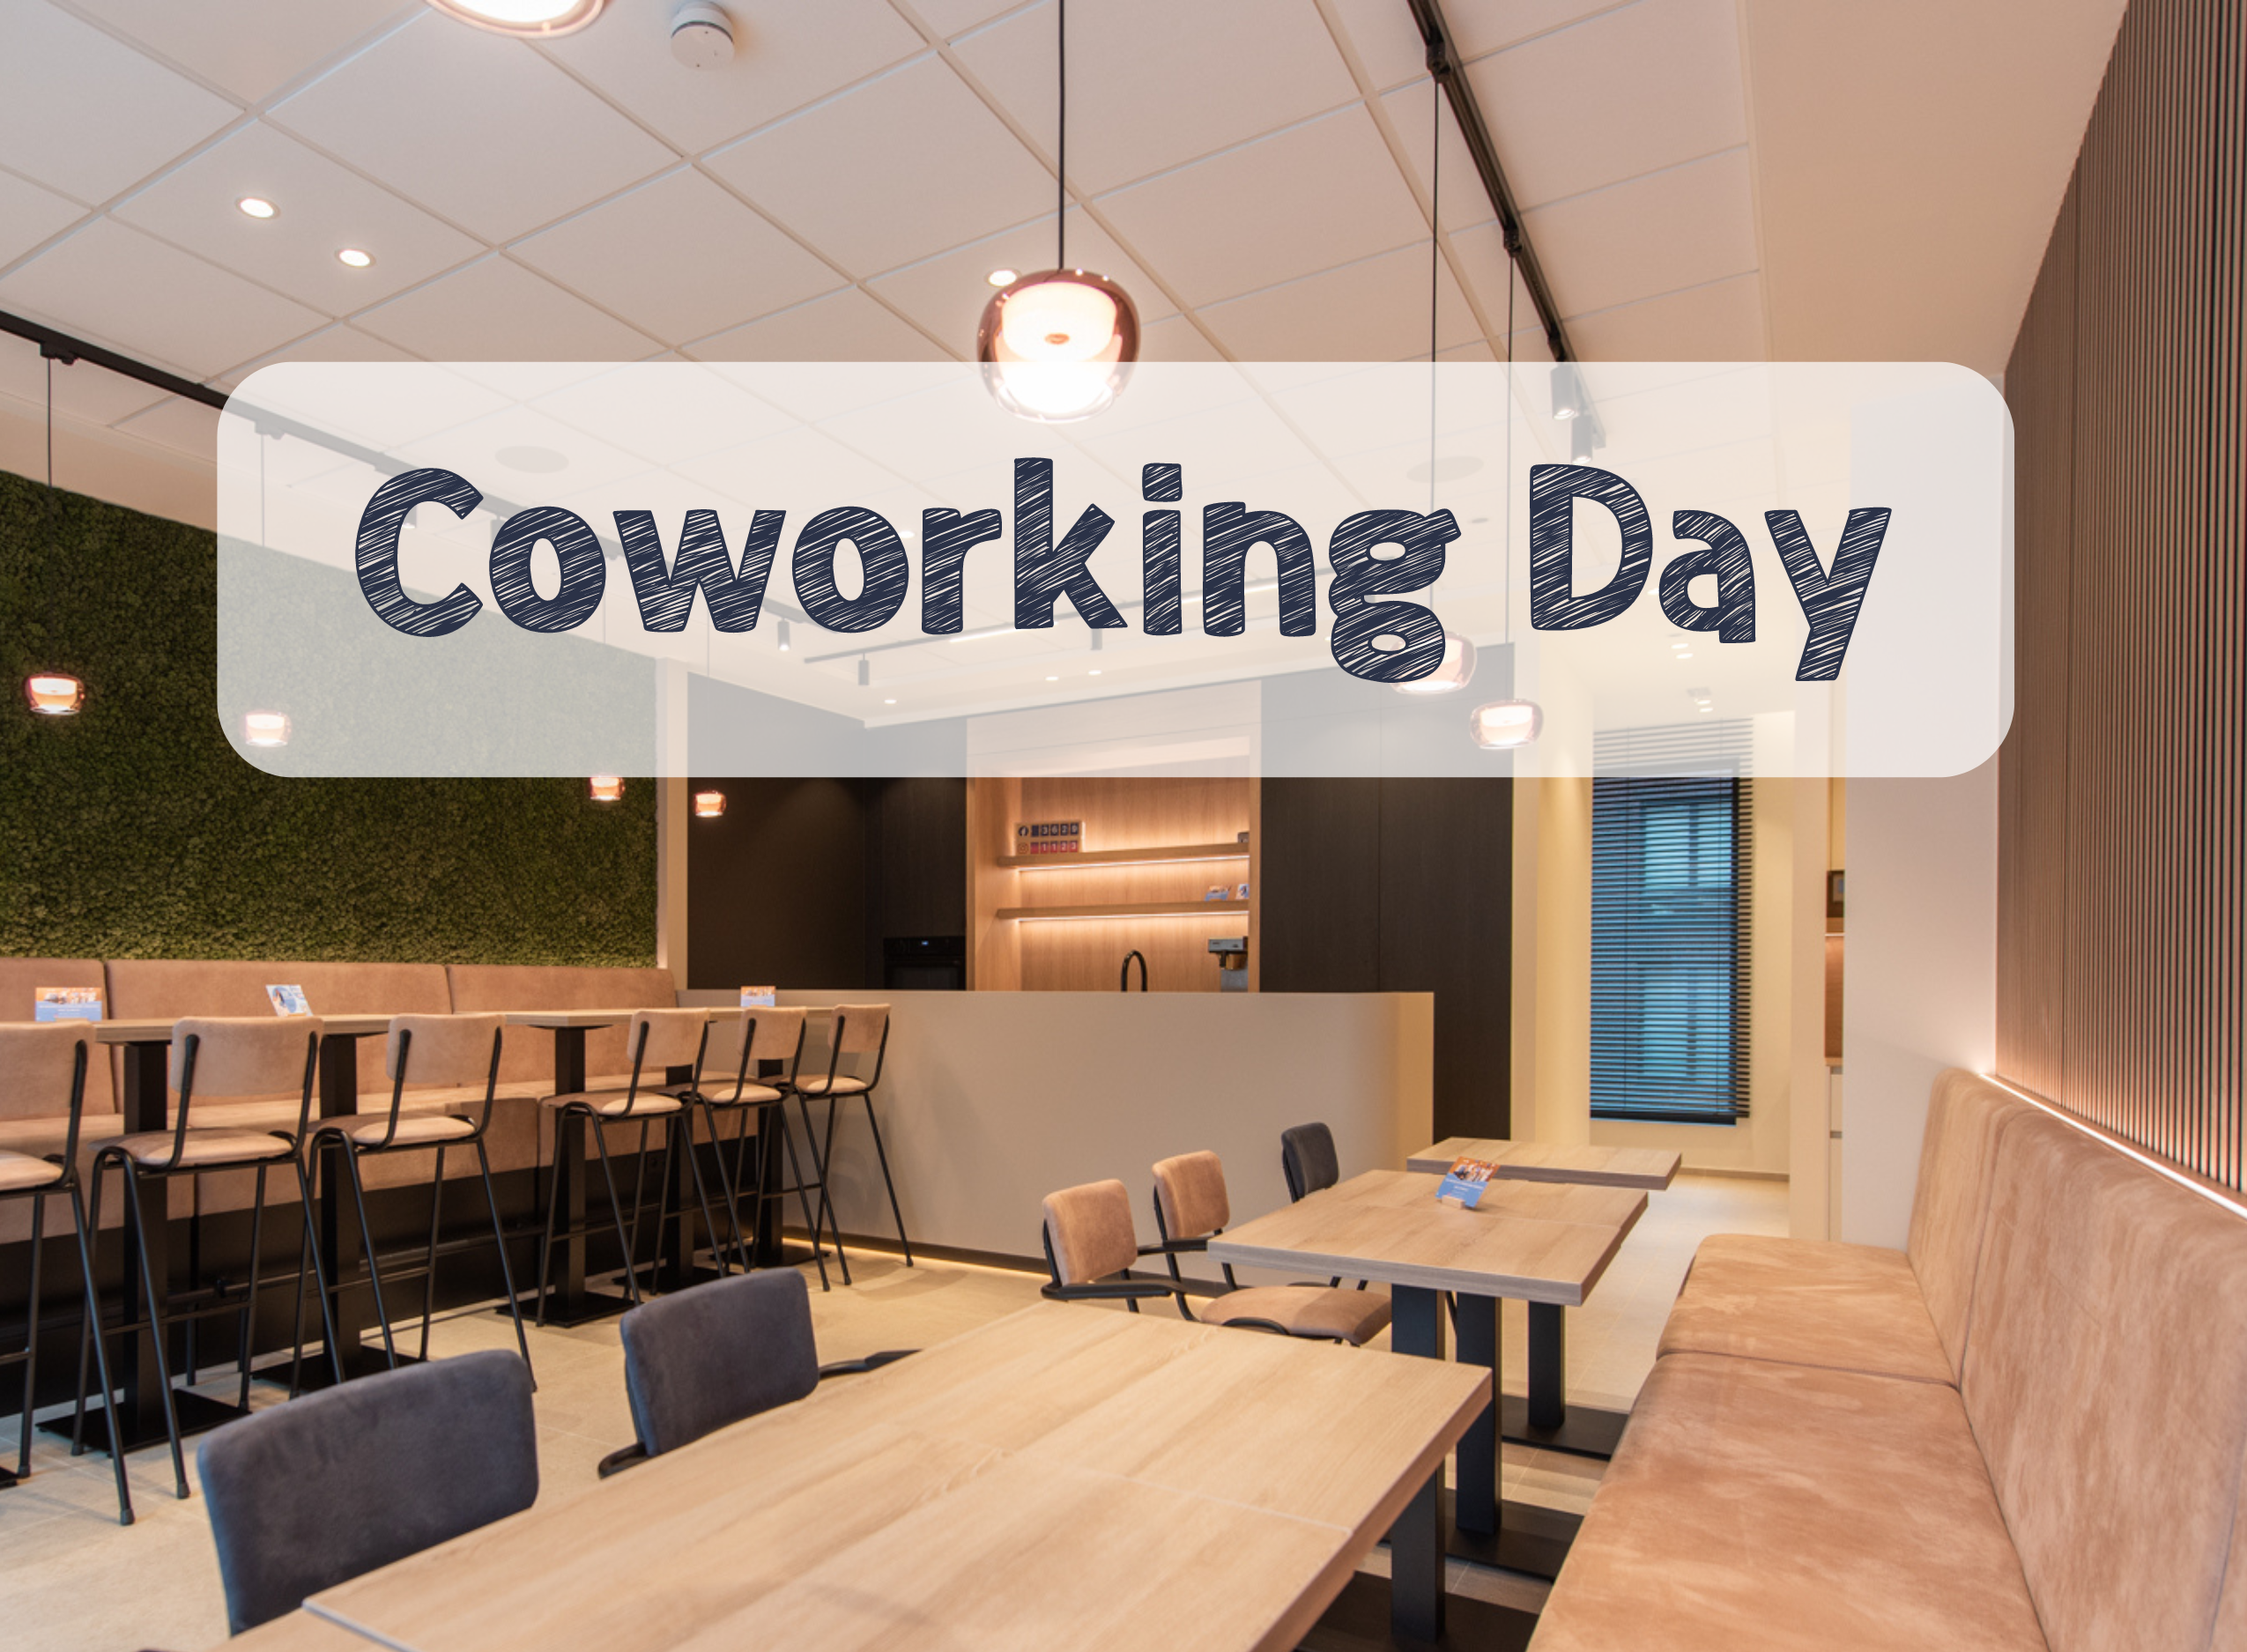 Coworking Day